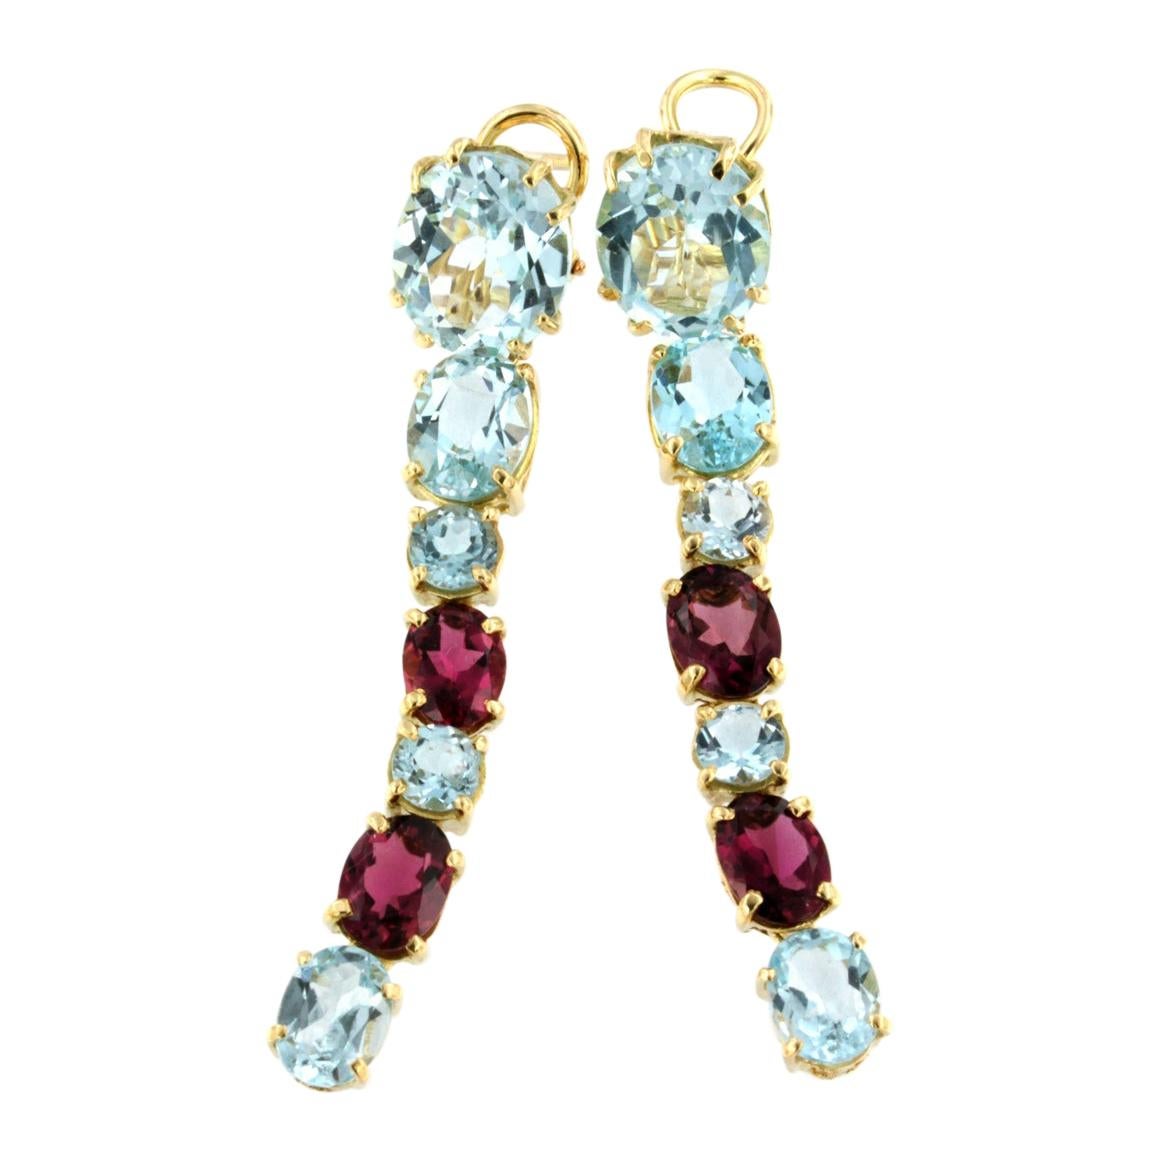 18k Rose Yellow Gold with Blue Topaz and Pink Tourmaline Earrings